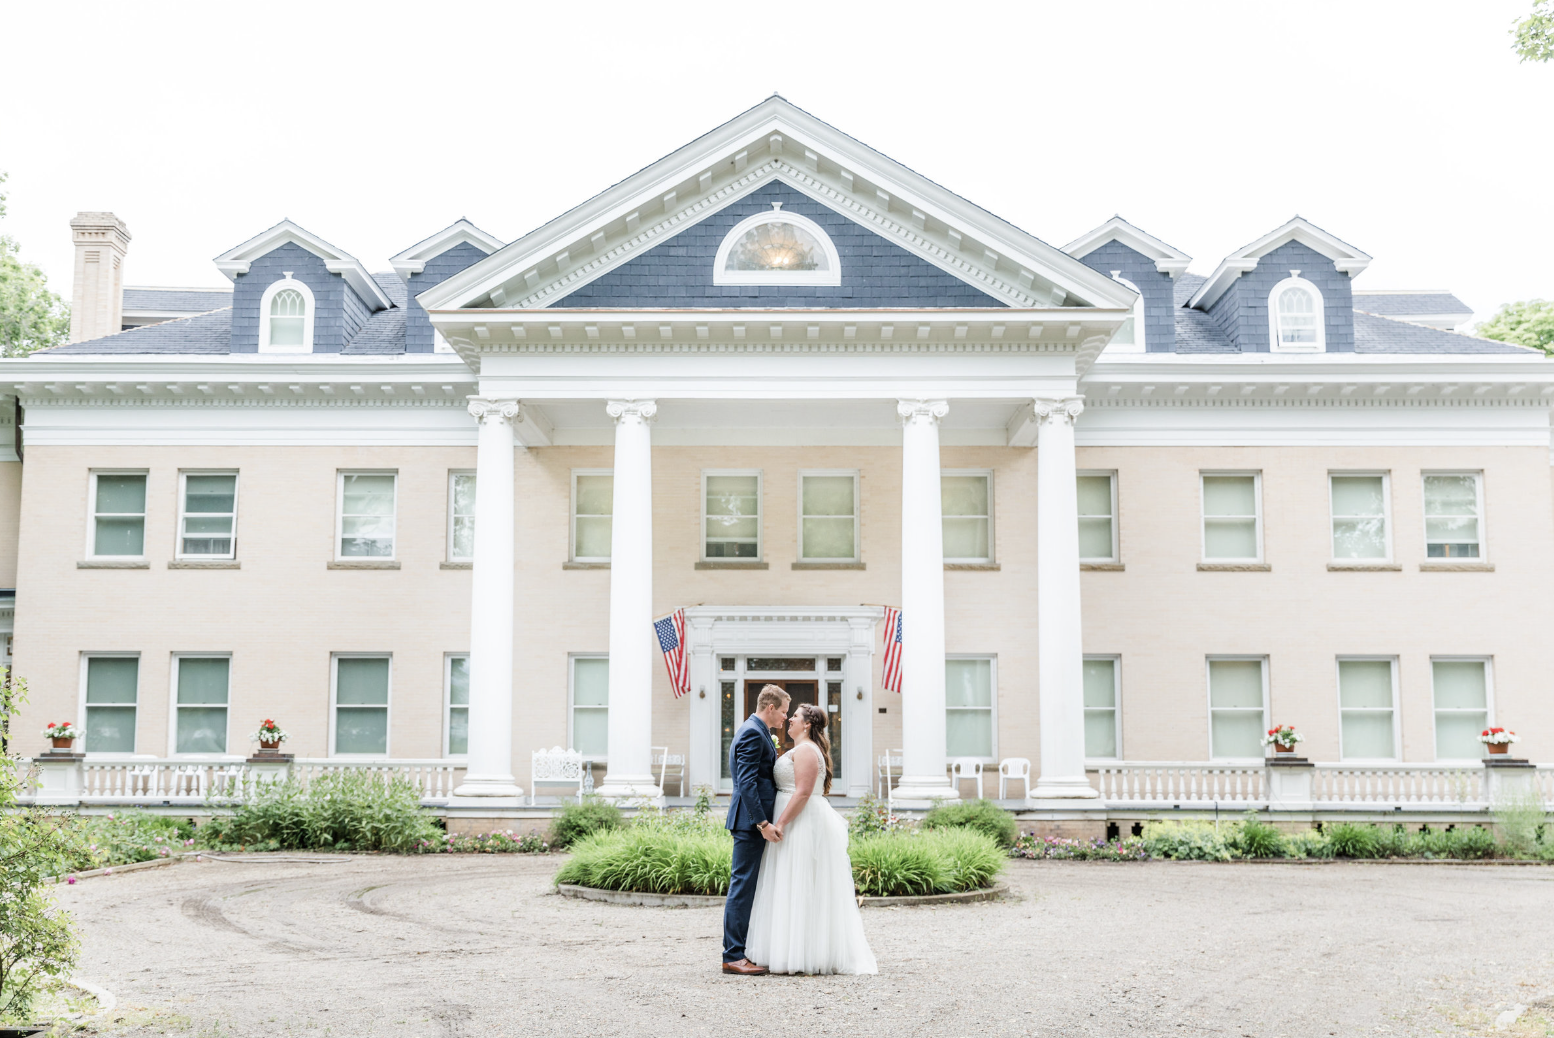 Couple standing hand in hand in front of wedding venue, smiling.